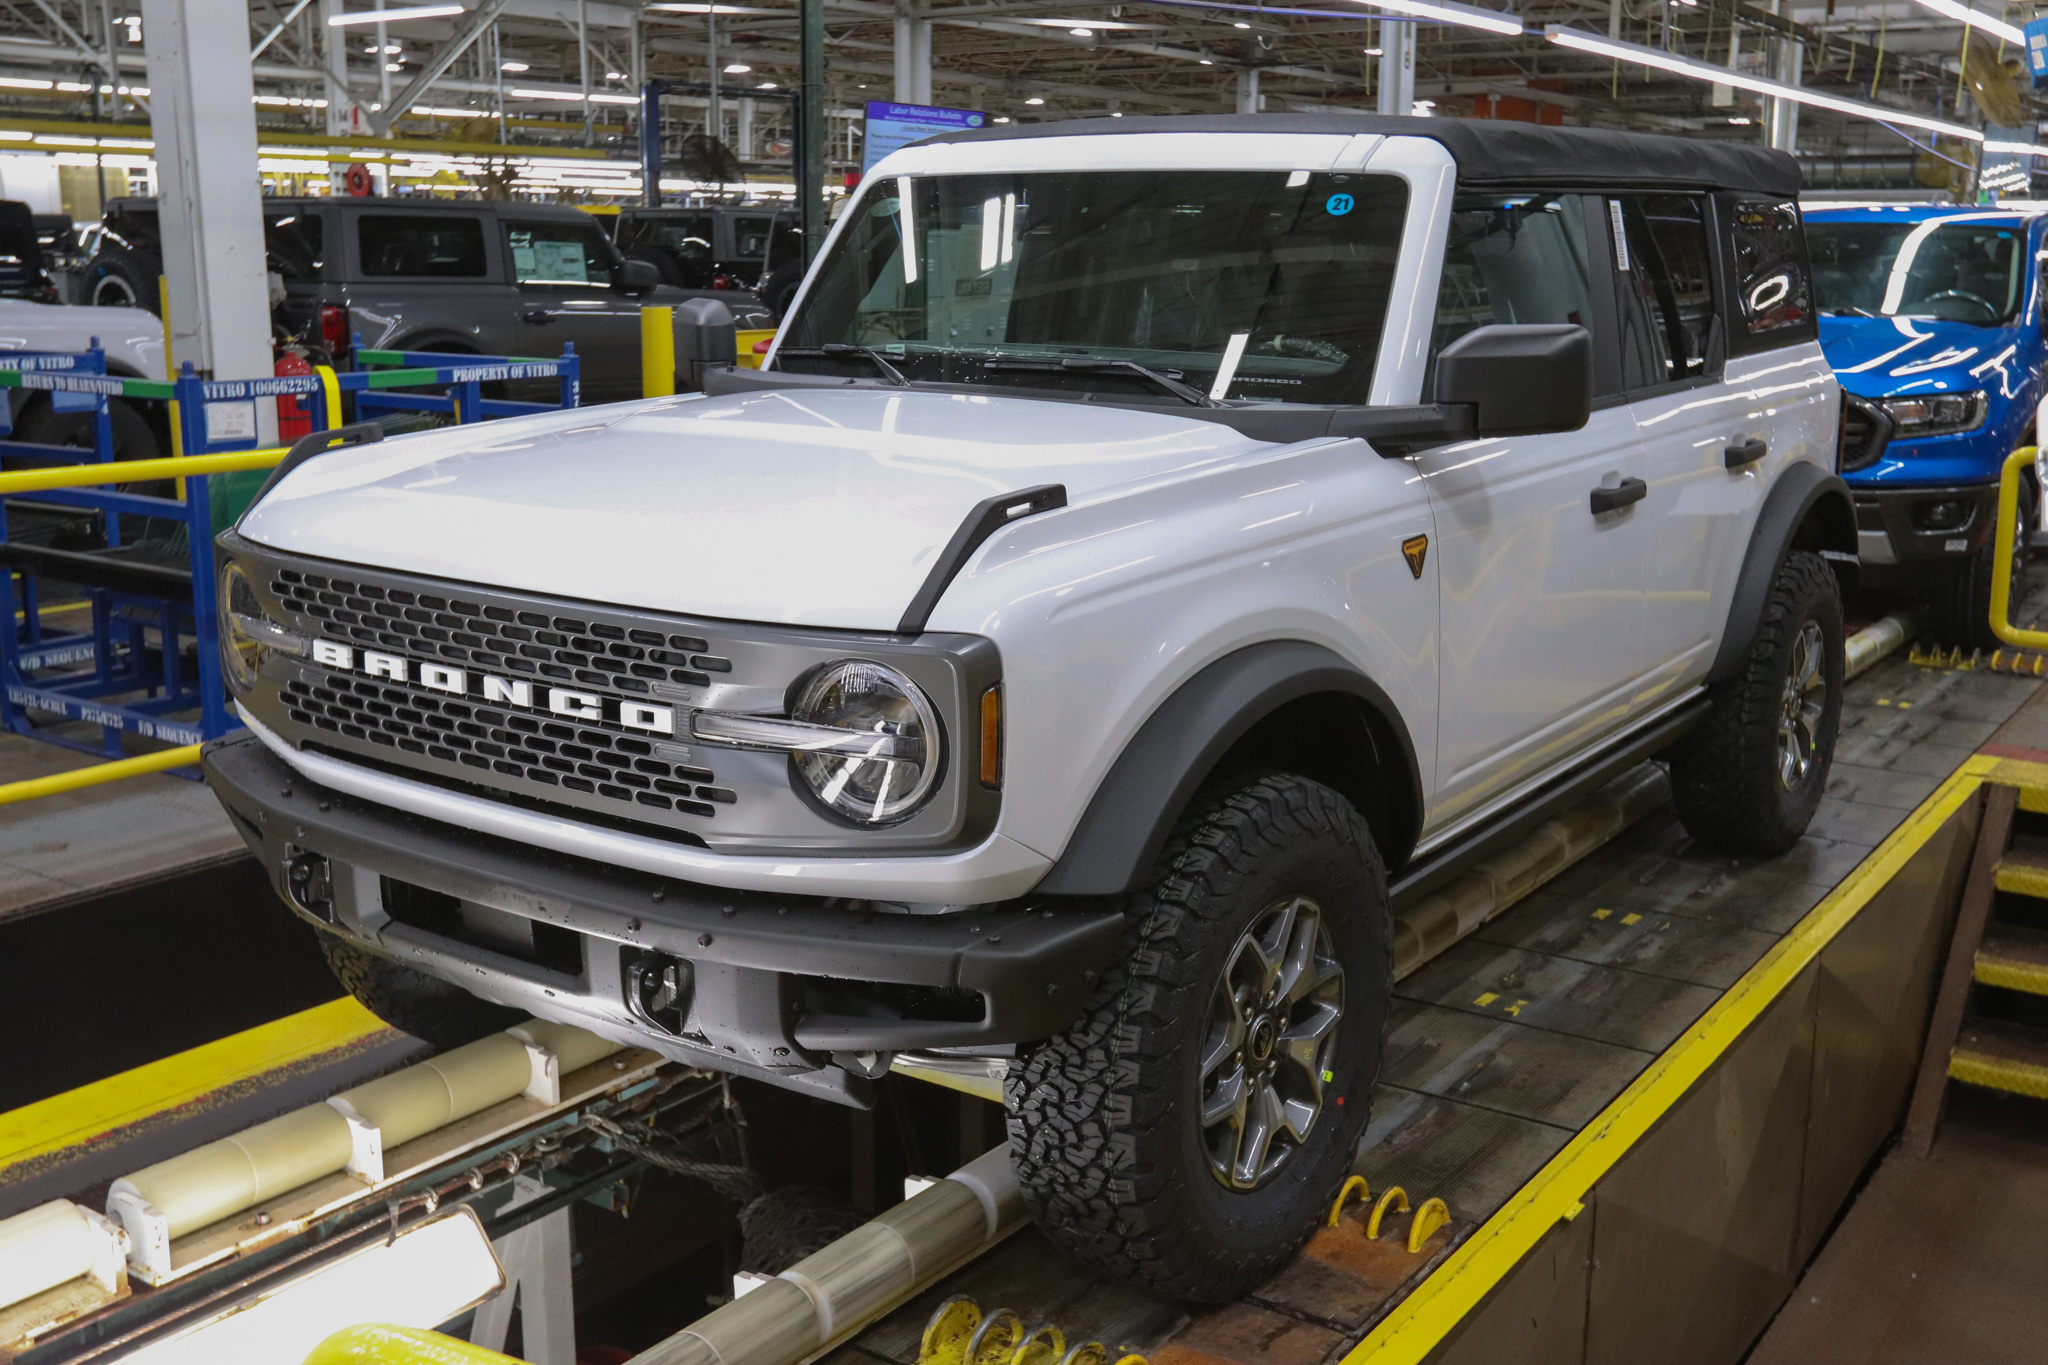 Ford Bronco Then & Now: show your assembly line Bronco and current Bronco picture 97DC9422-16B3-49A1-8CCE-9F5F61A57014